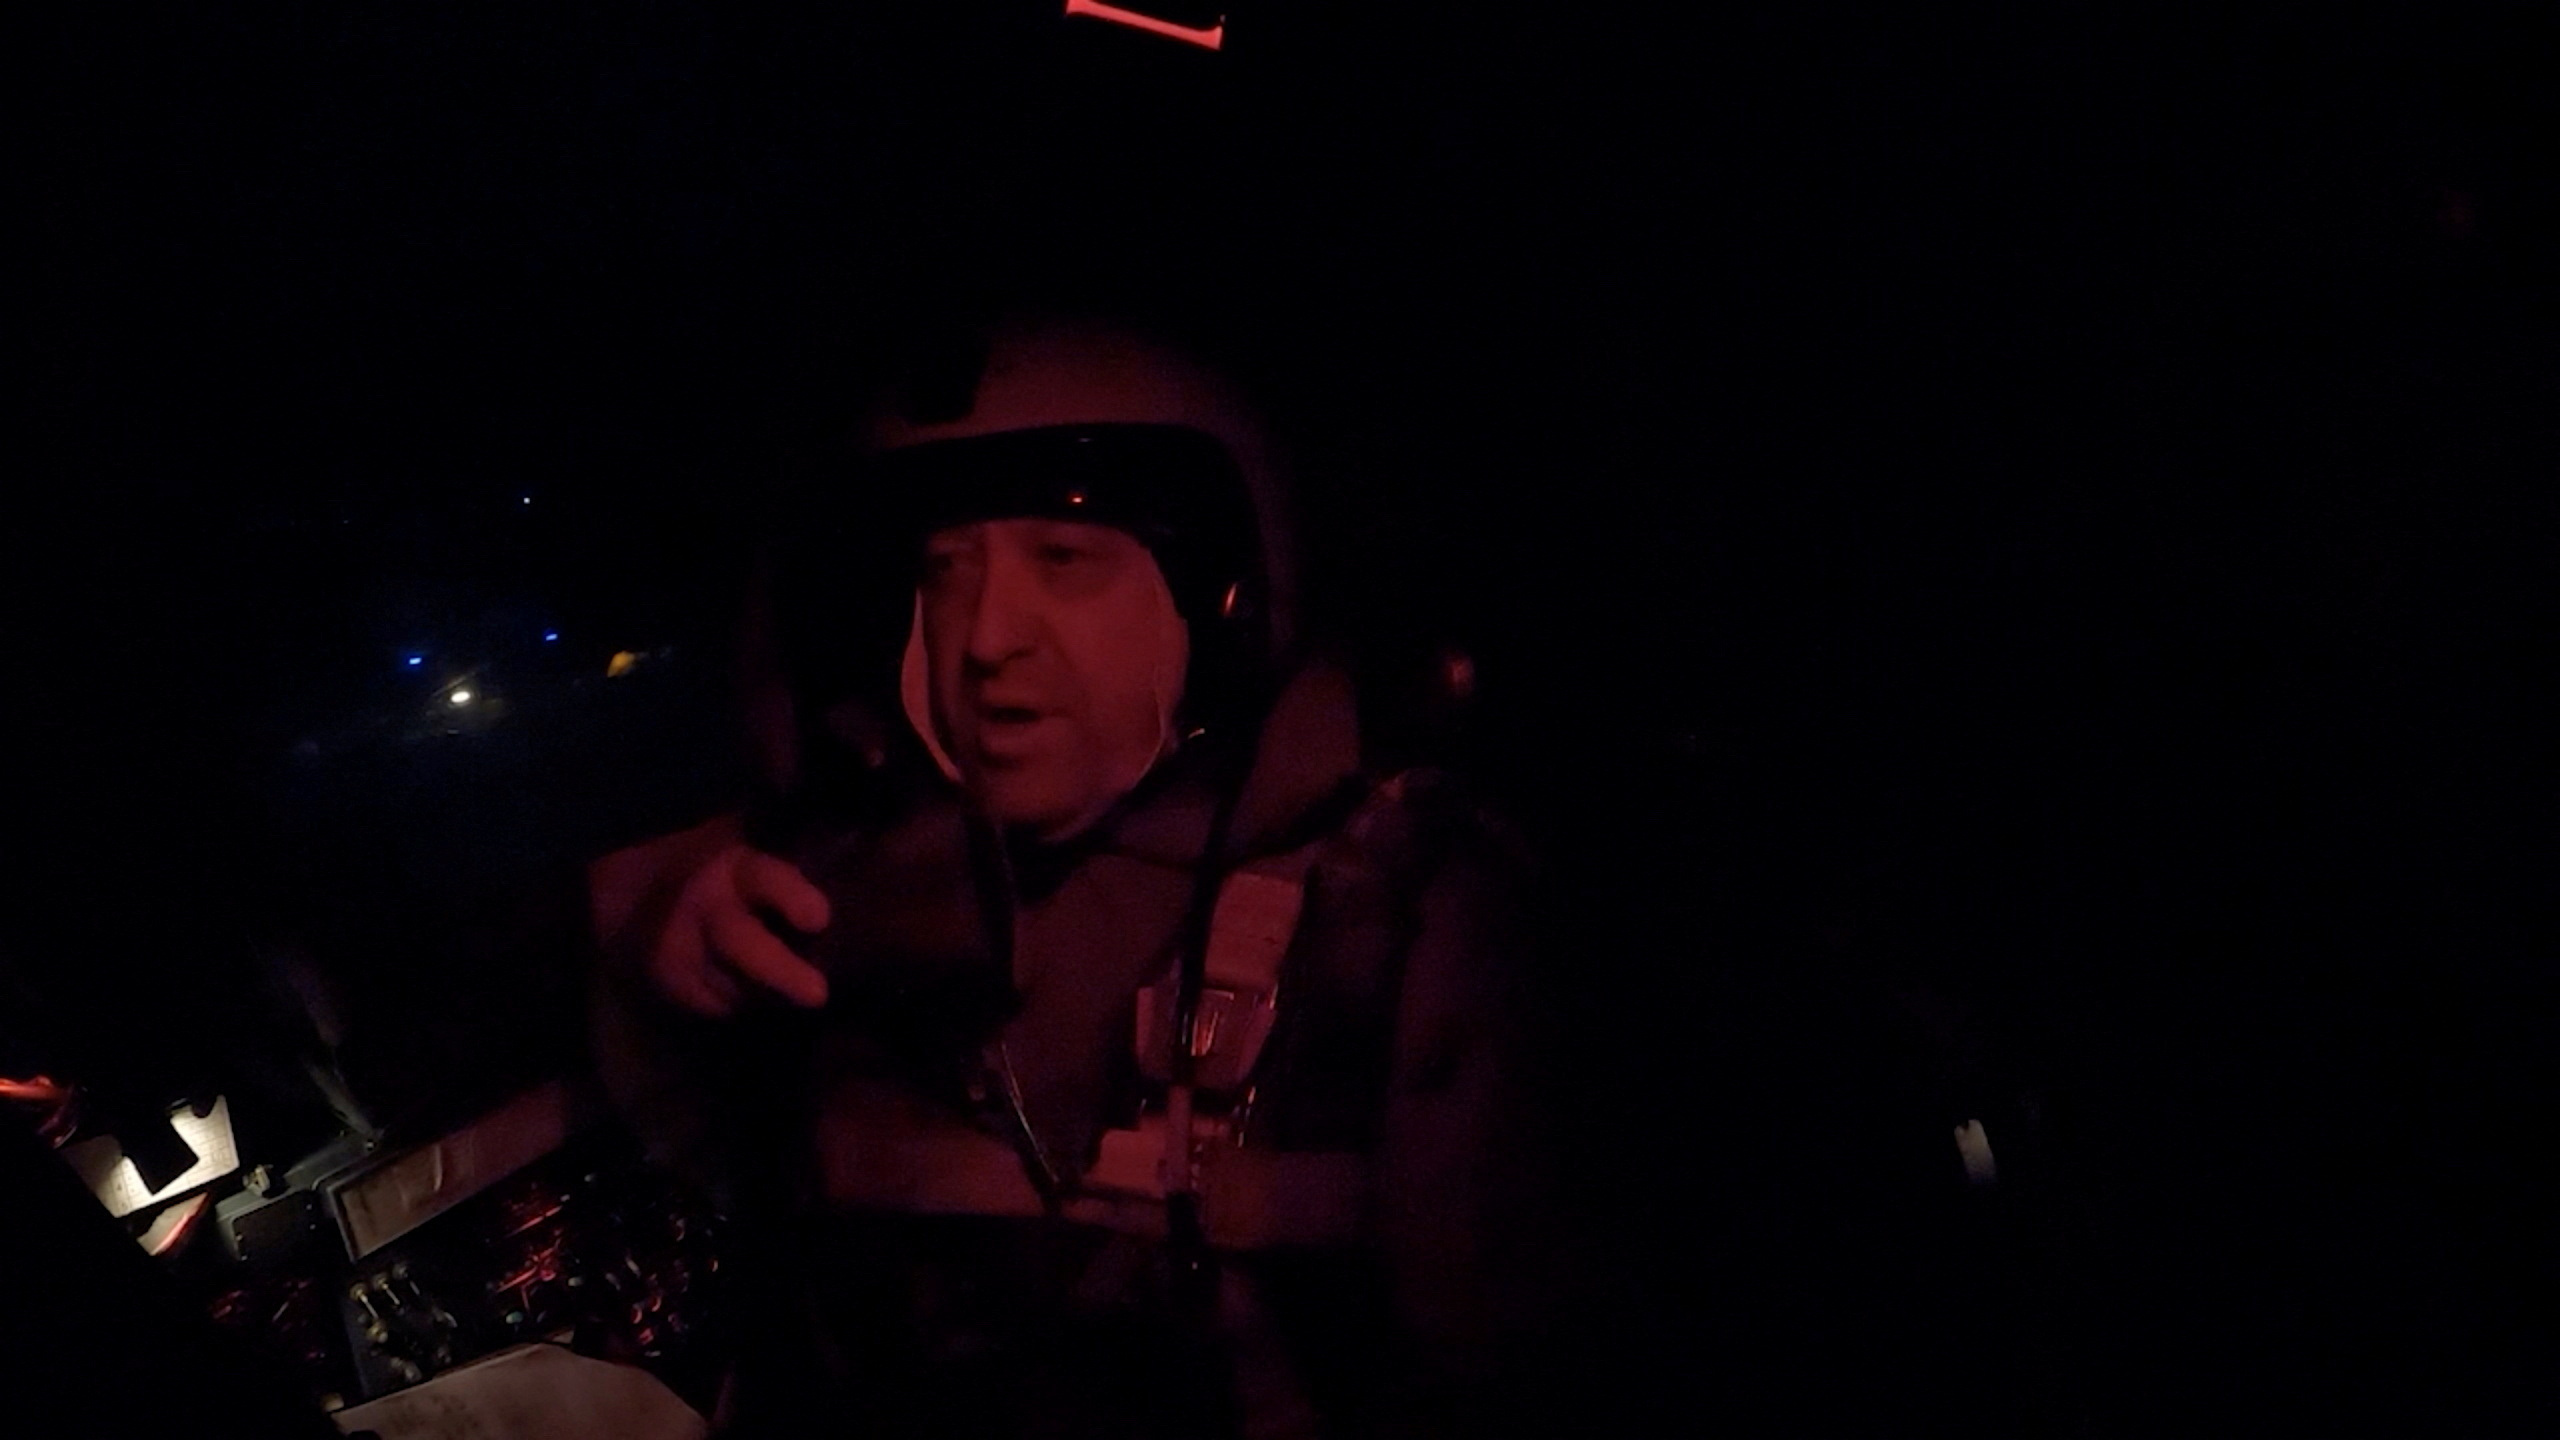 The founder of Russia's Wagner mercenary group Yevgeny Prigozhin is seen inside a cockpit of a military Su-24 bomber plane over an unidentified location